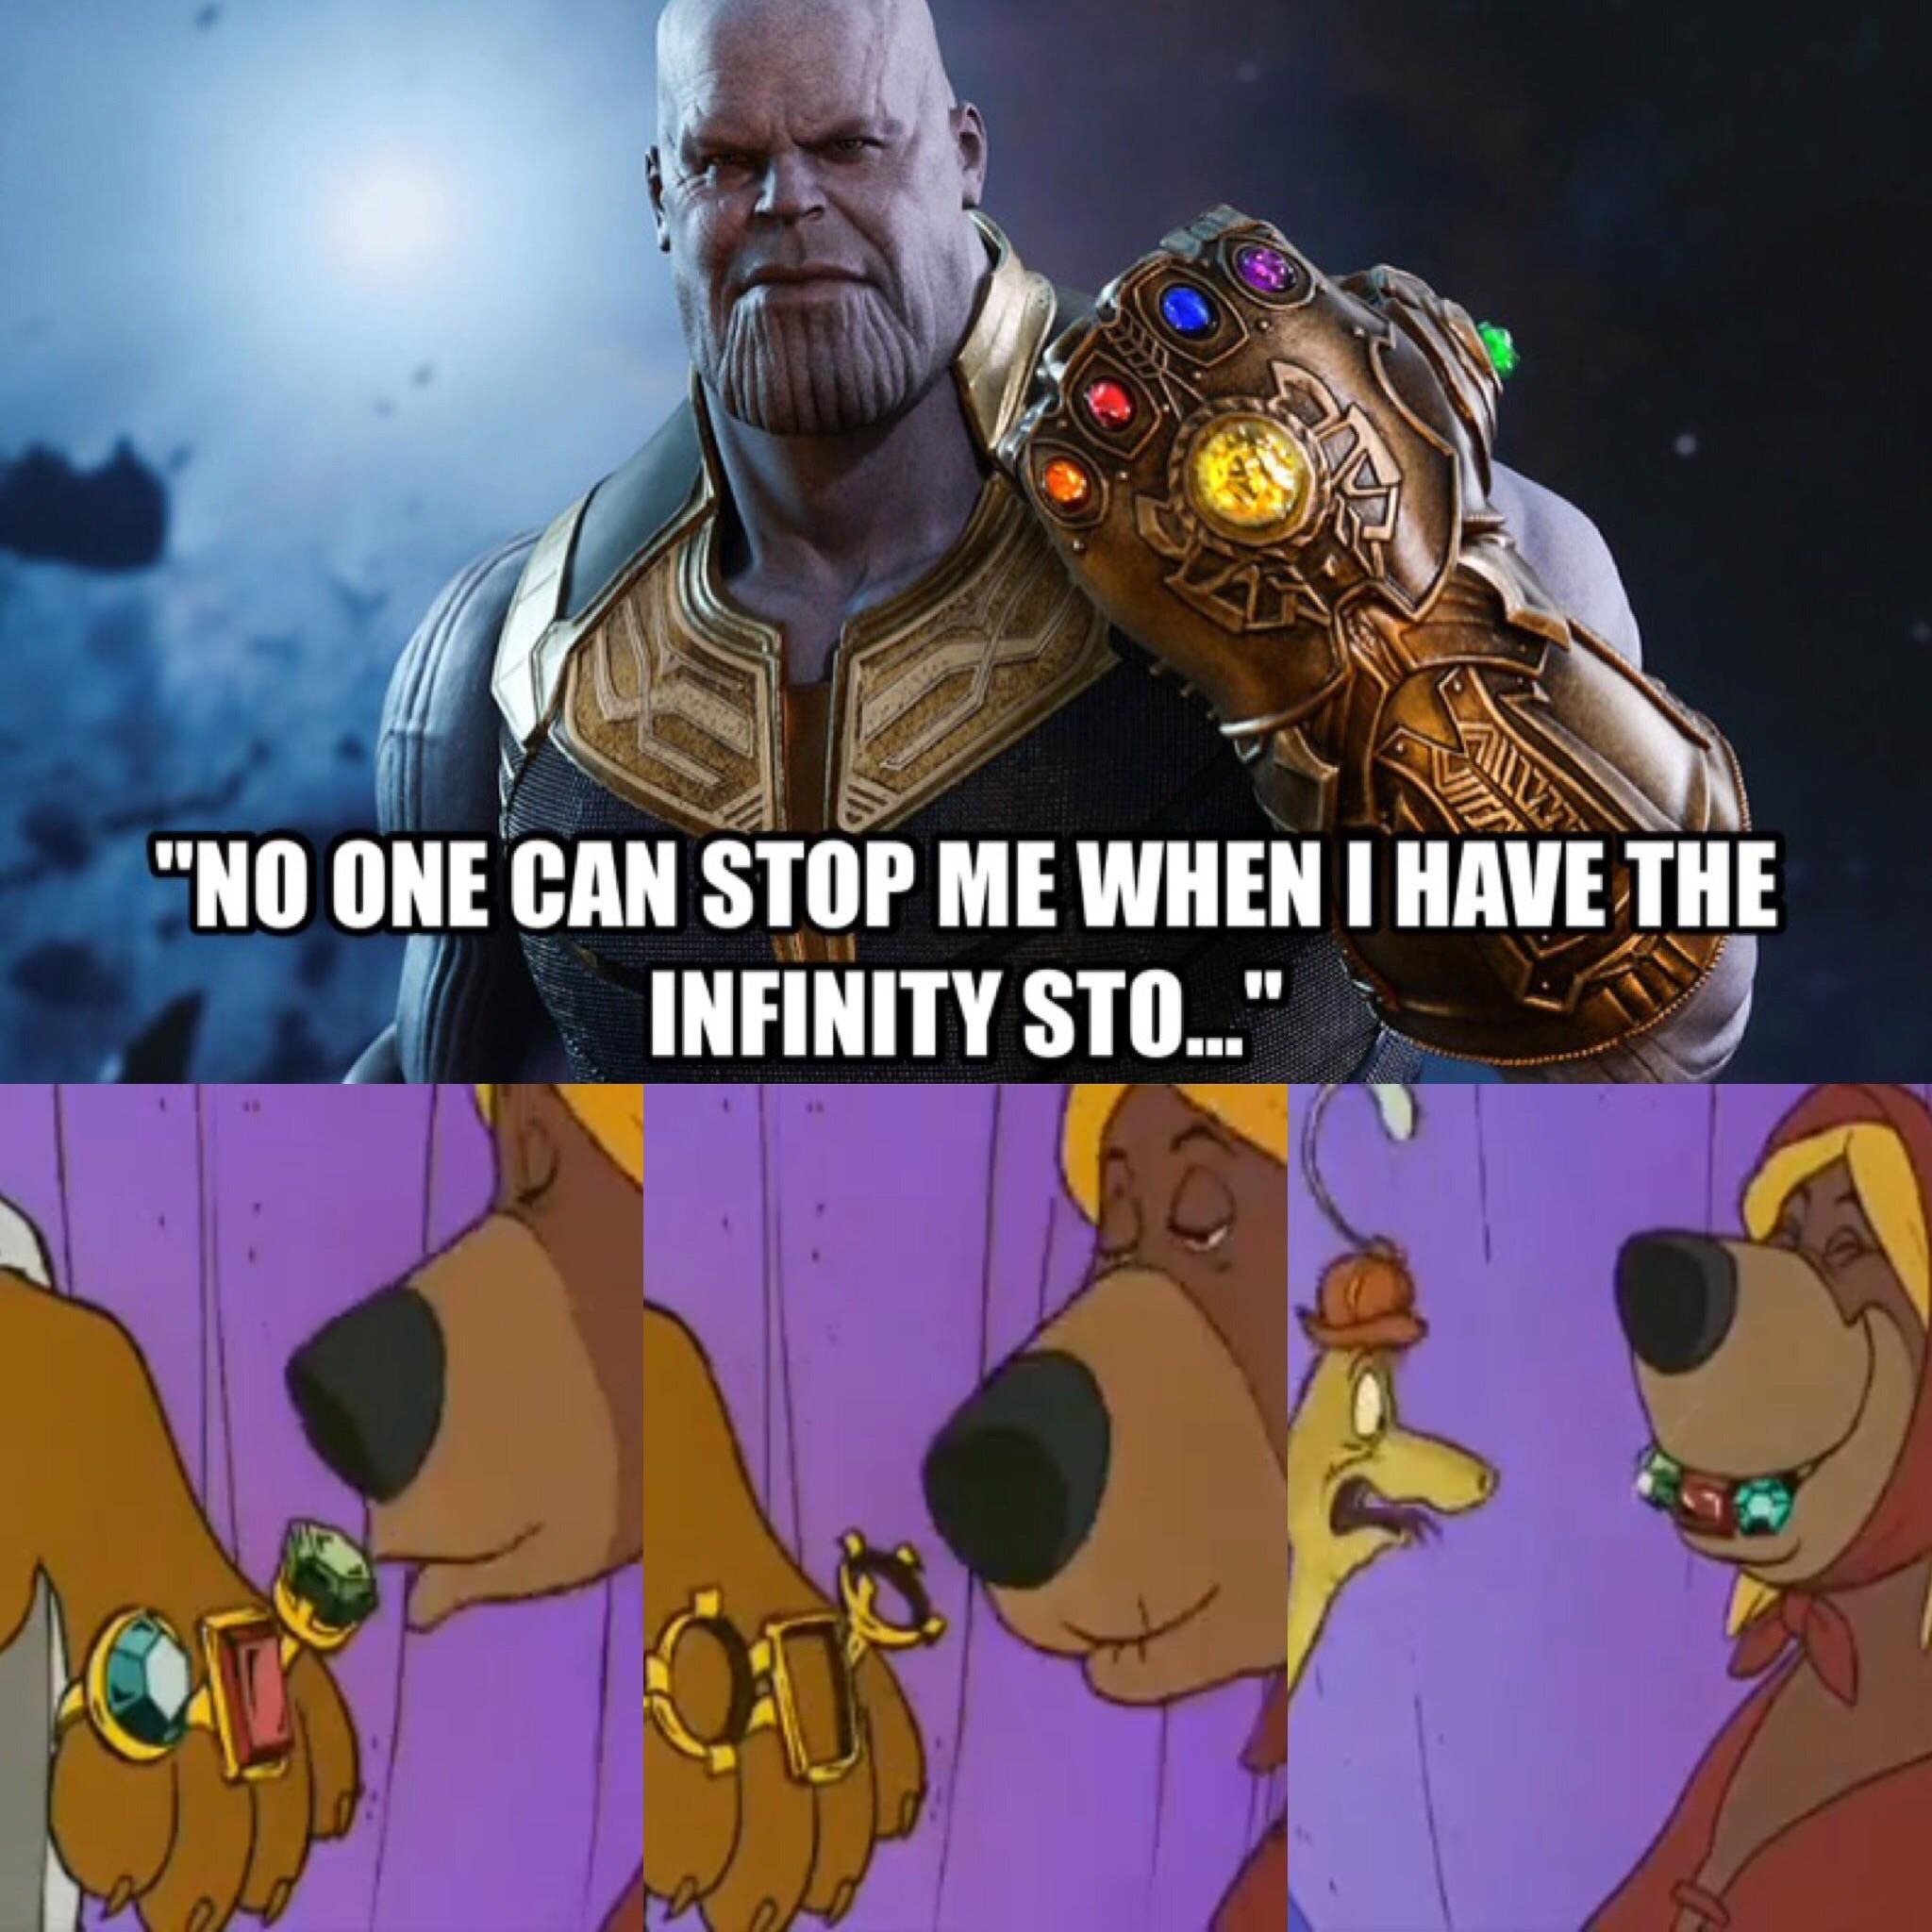 Thanos never even saw it coming